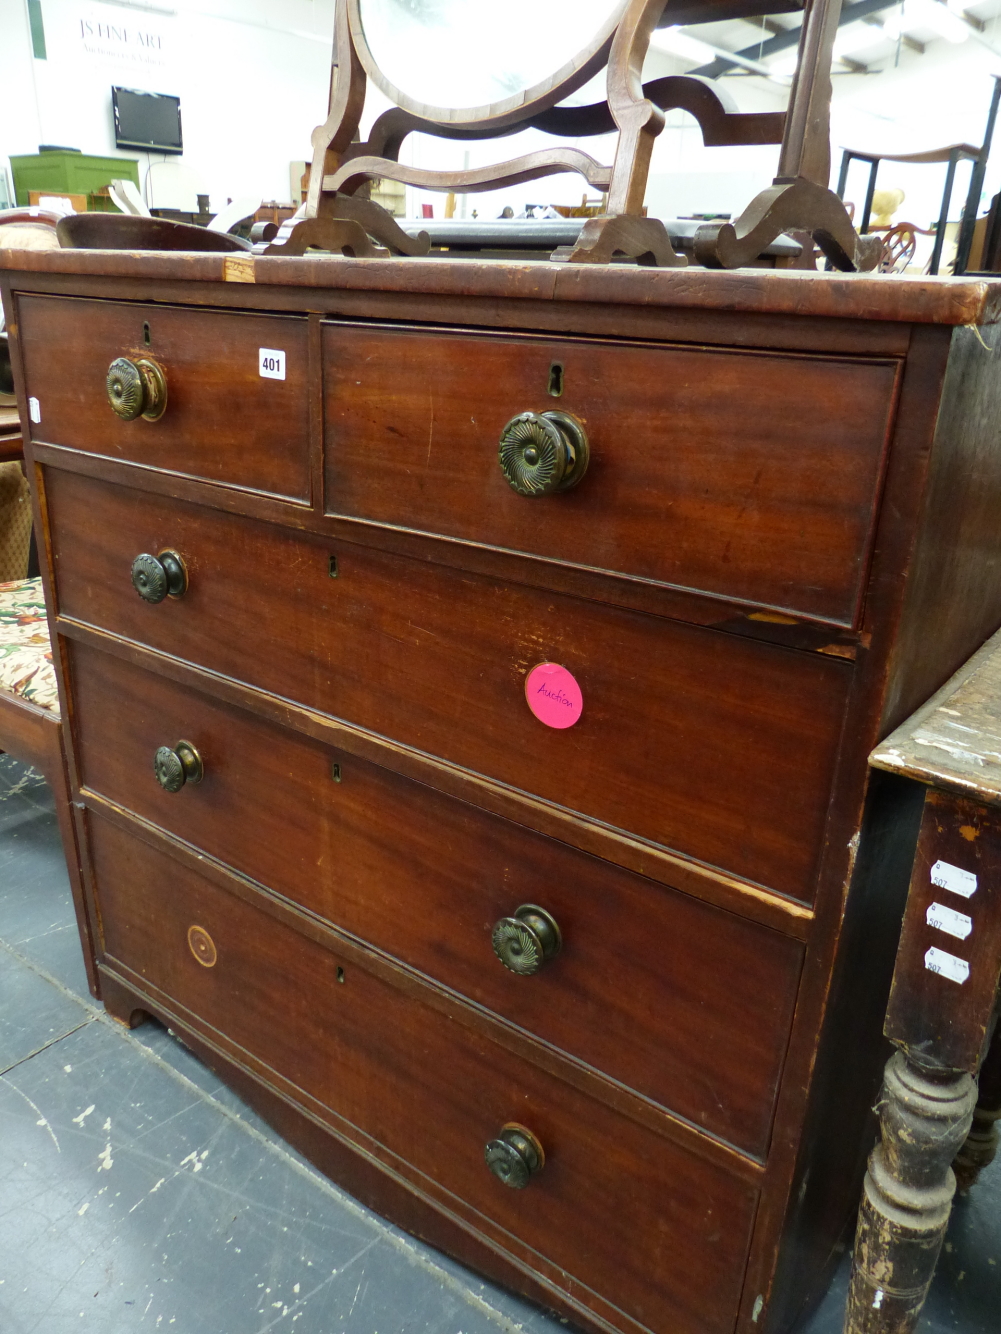 A VICTORIAN MAHOGNY CHEST OF DRAWERS.